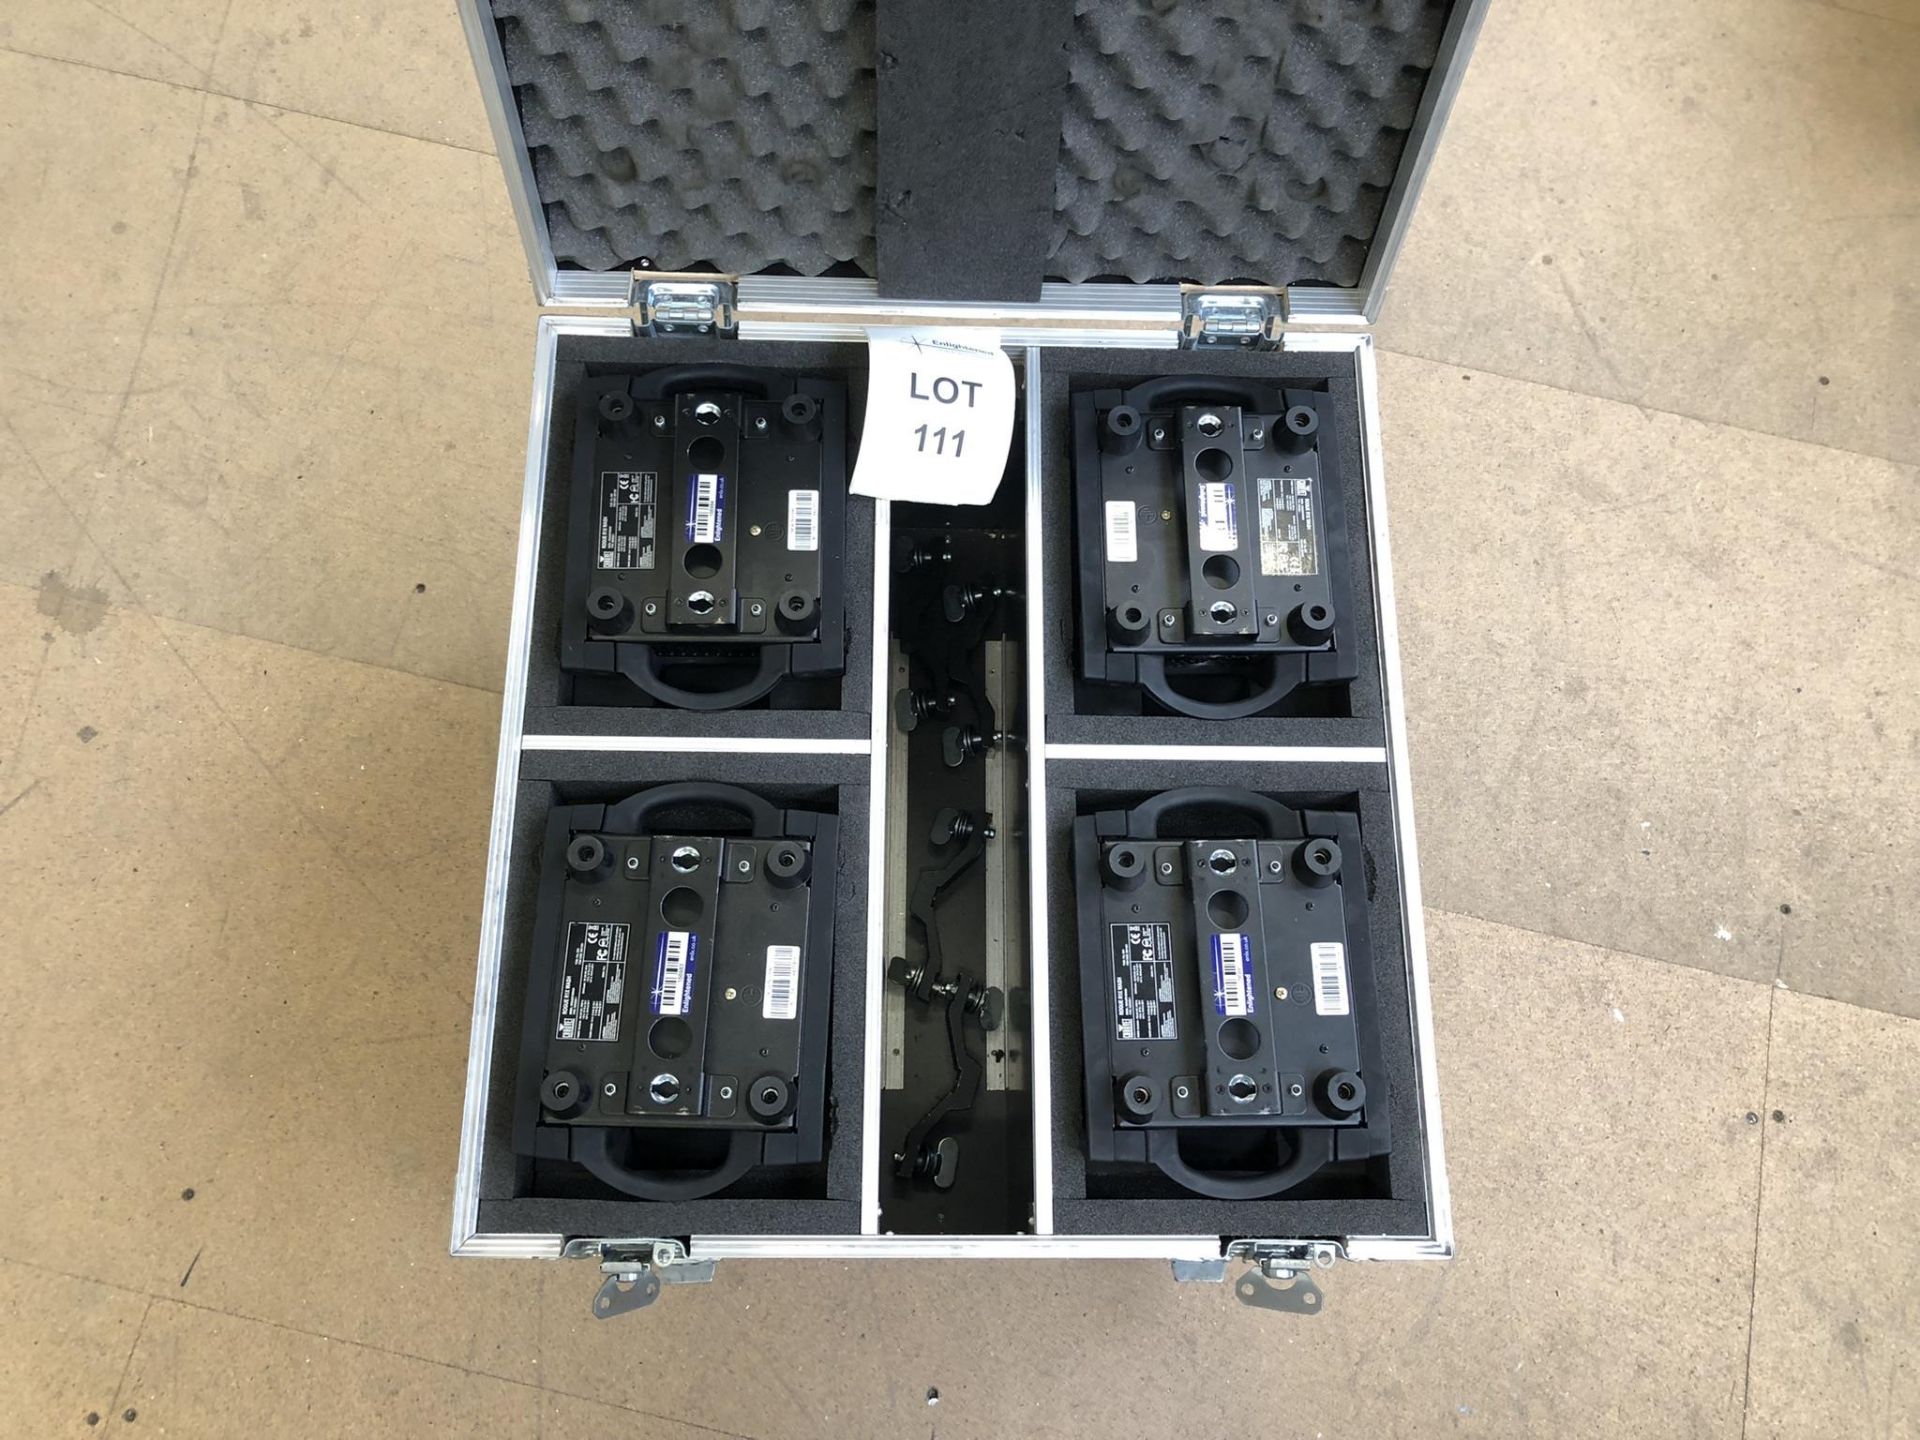 4x Chauvet Professional Rogue R1X Wash in 4 Way Case Condition: Ex-Hire 4 heads with quad case. - Image 8 of 8